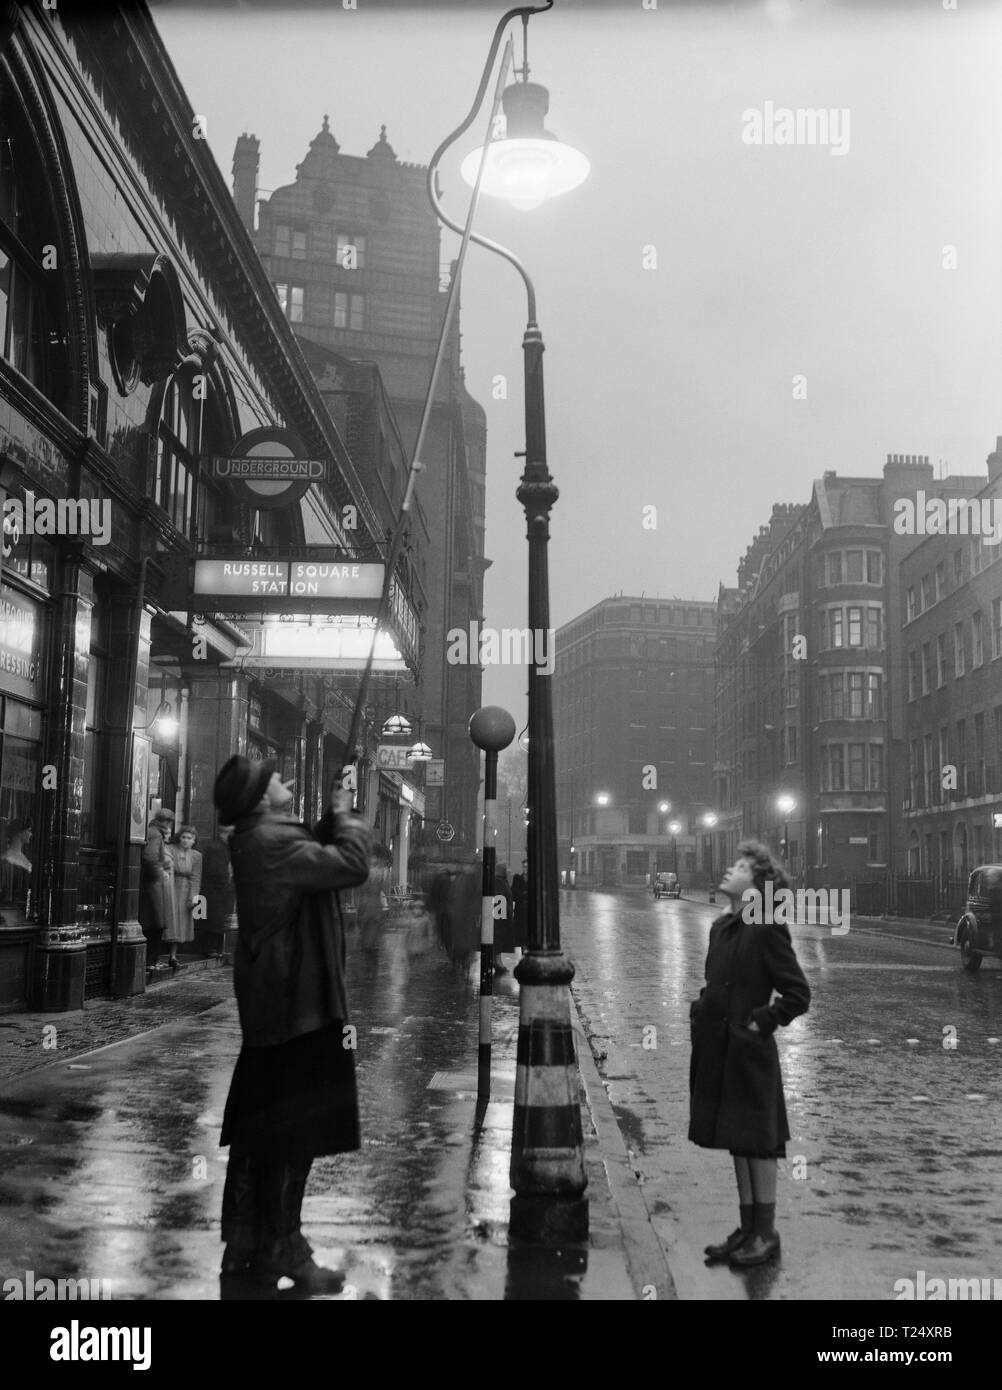 Black and white photograph taken in 1950 outside Russell Square Underground Tube station in London, England. It shows a man lighting a gas street lamp, watched by a young girl. Stock Photo